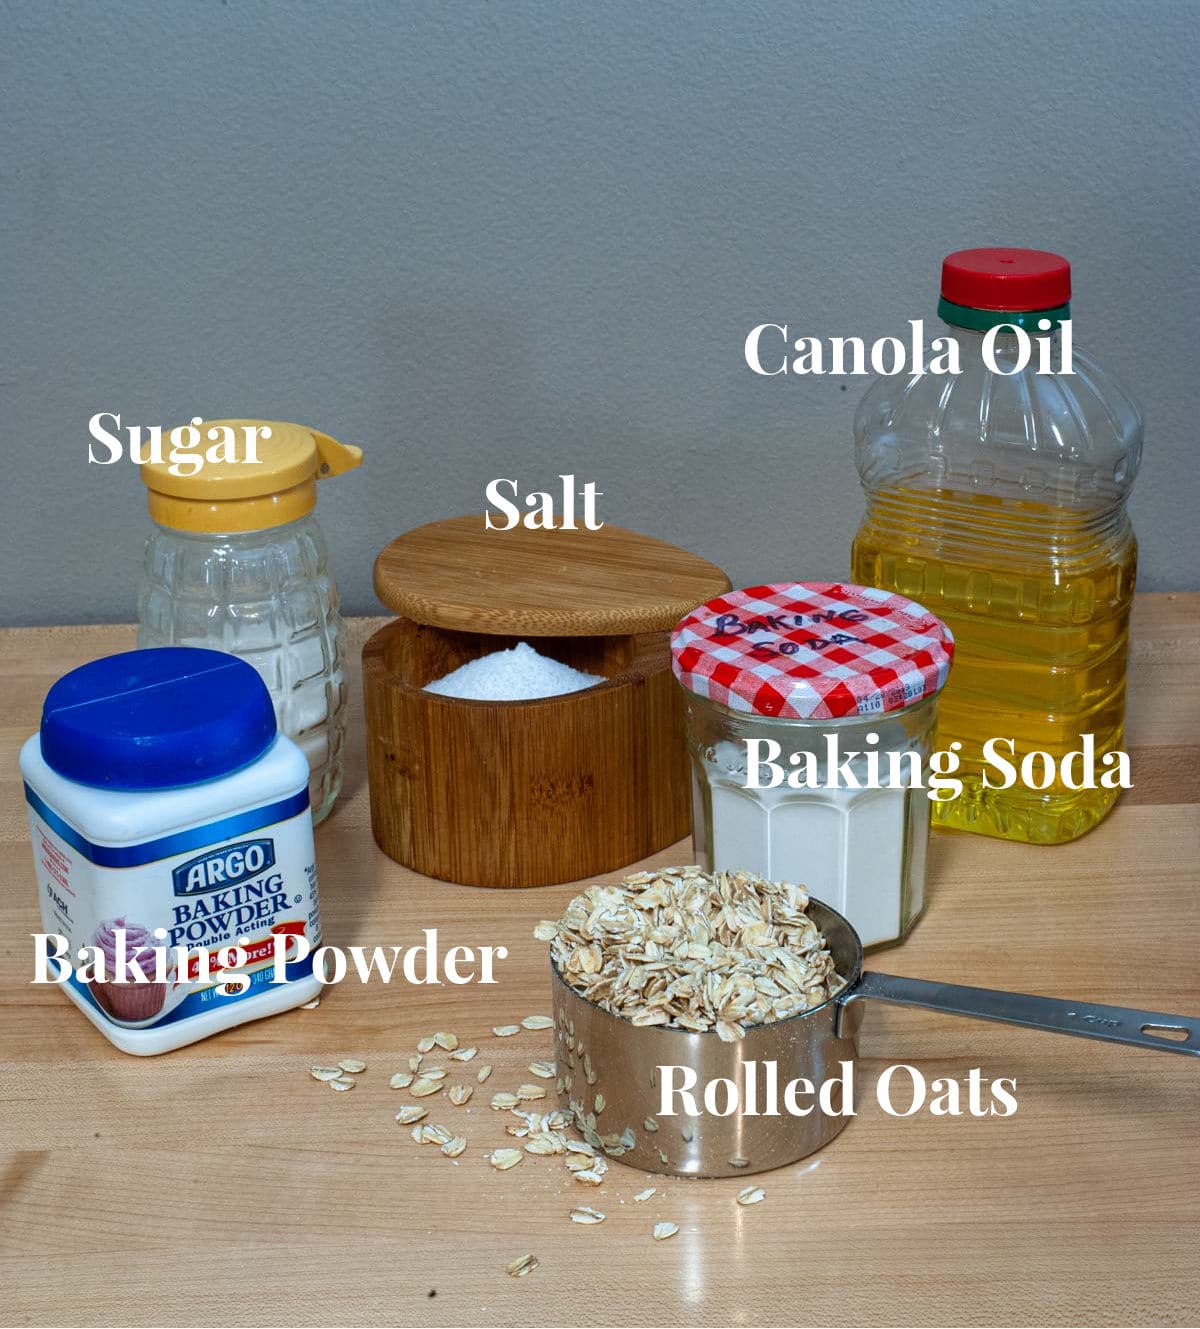 Picture of ingredients for whole wheat pancake mix.